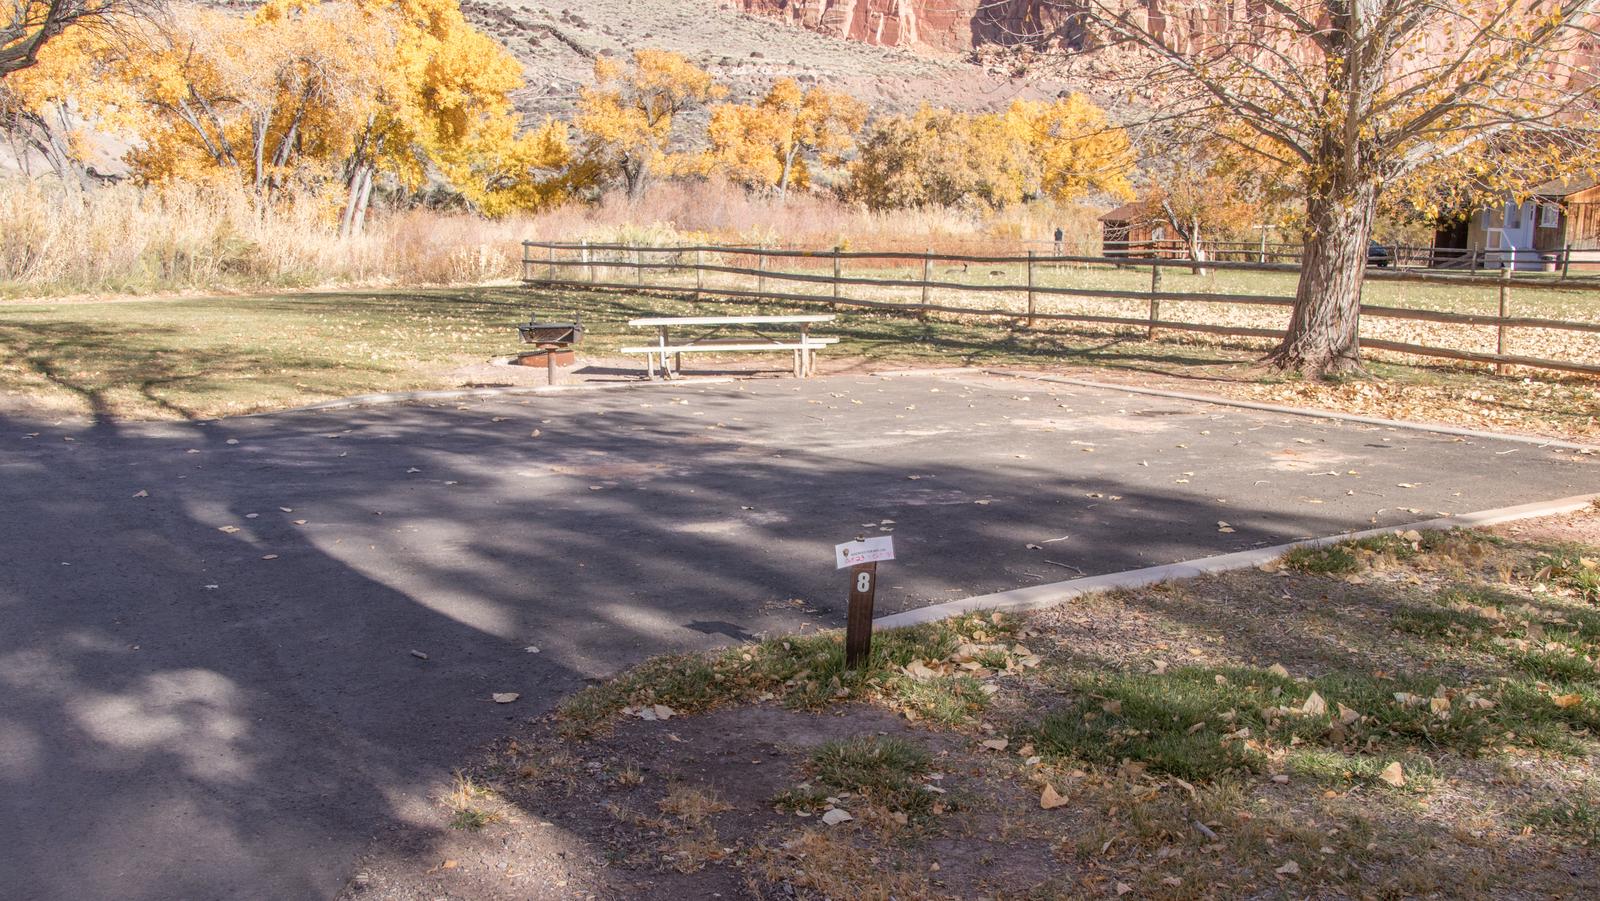 A paved driveway. Facing the end of the driveway, a picnic table, grill, and fire pit are off to the left side. A tree is directly behind the site. Site 8, Loop 1 in fall. Admin Site.
Paved Dimensions: 30' x 30'